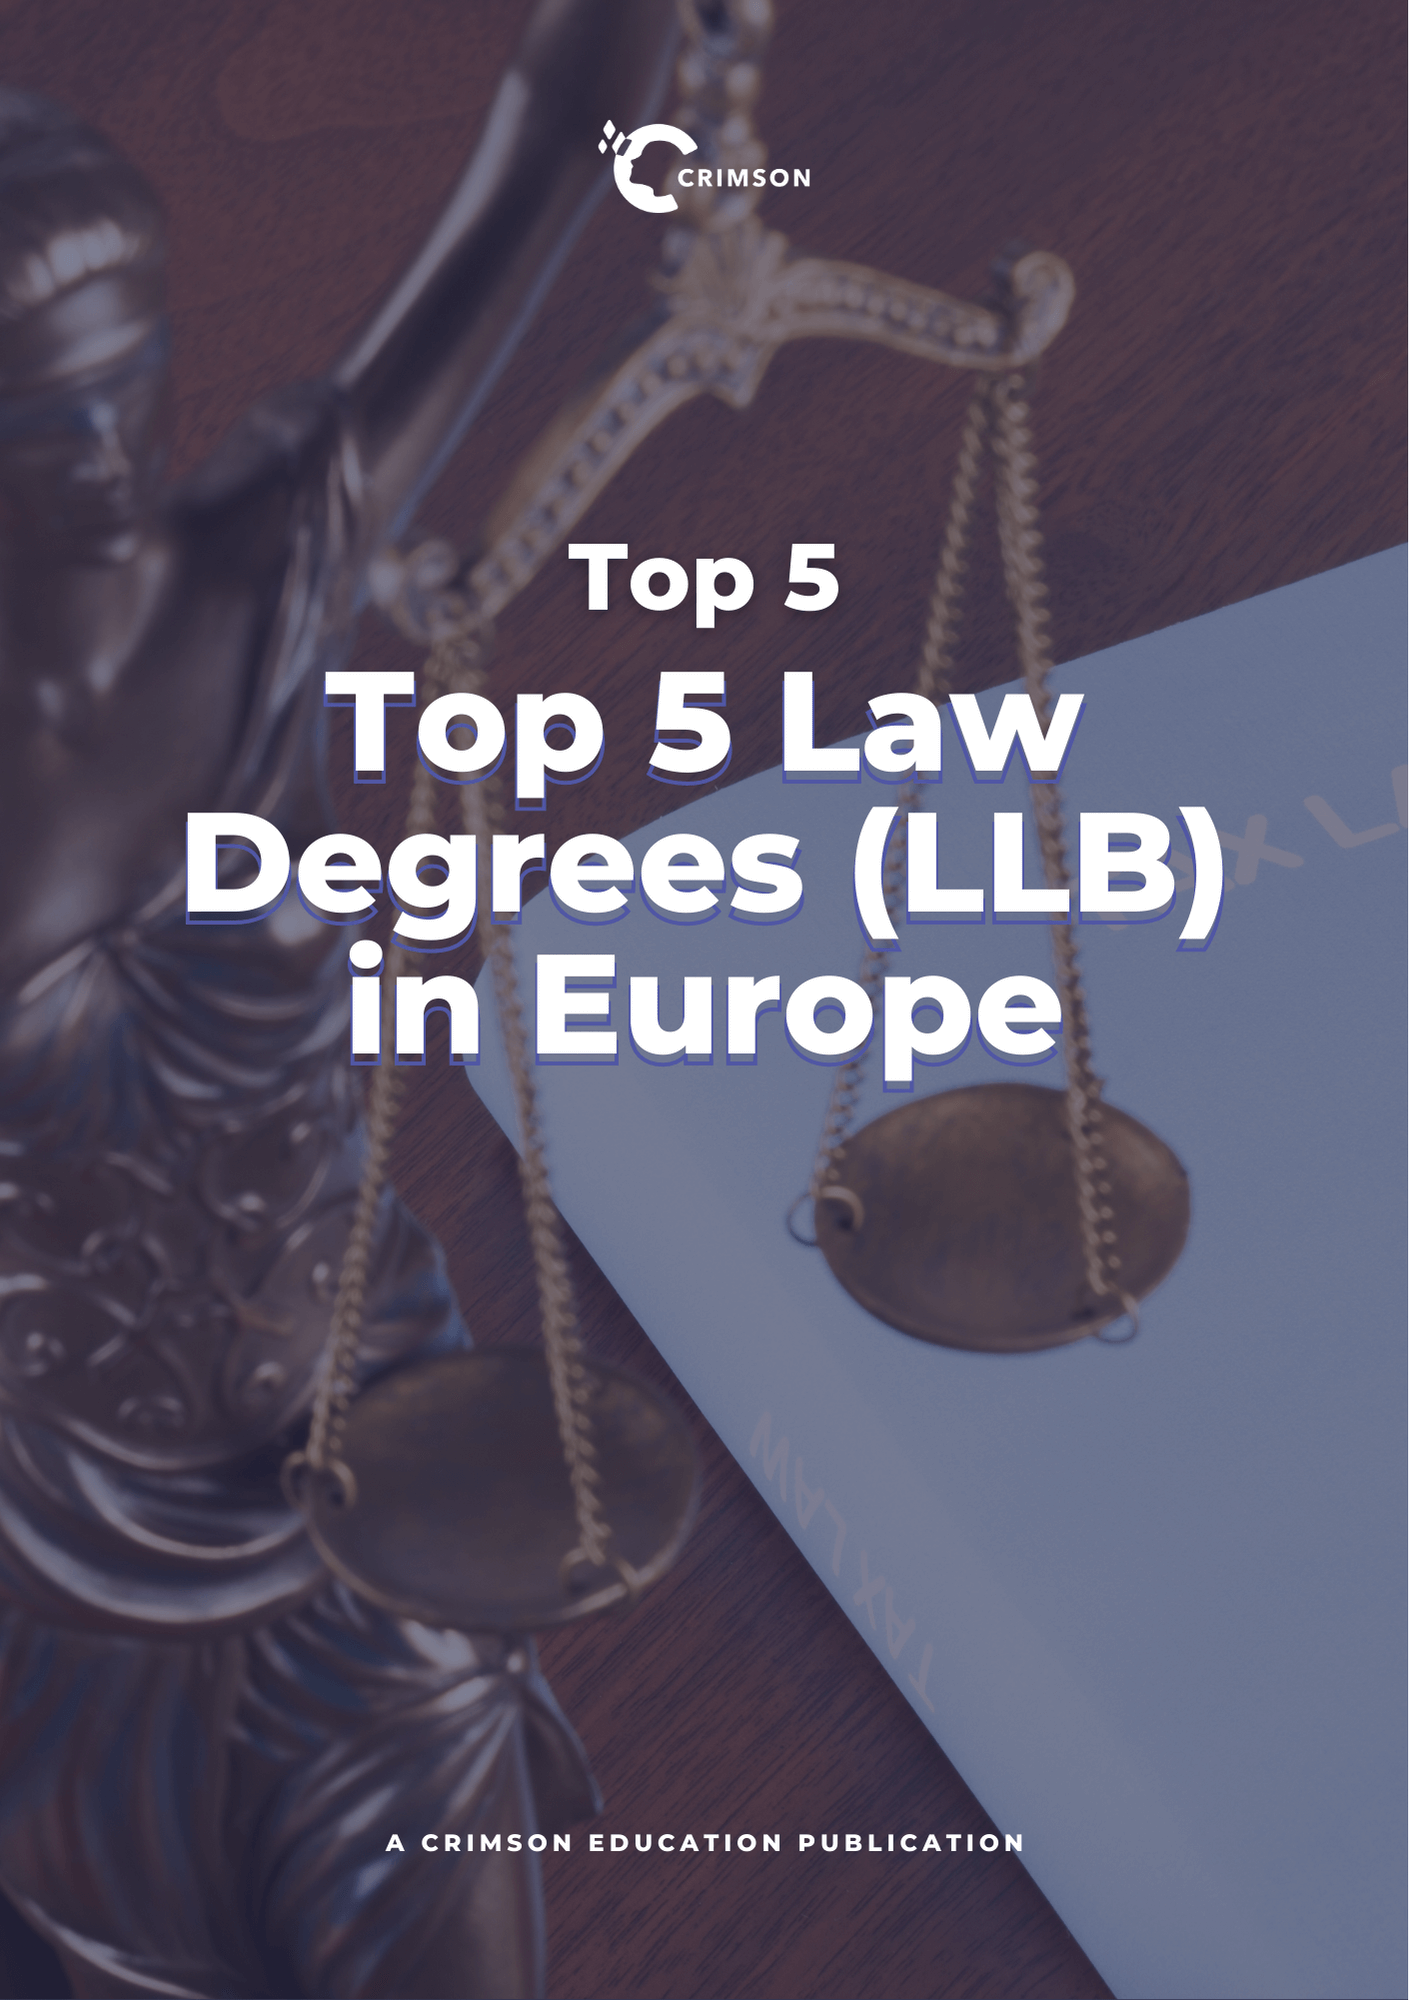 Top 5 Law Degrees in Europe